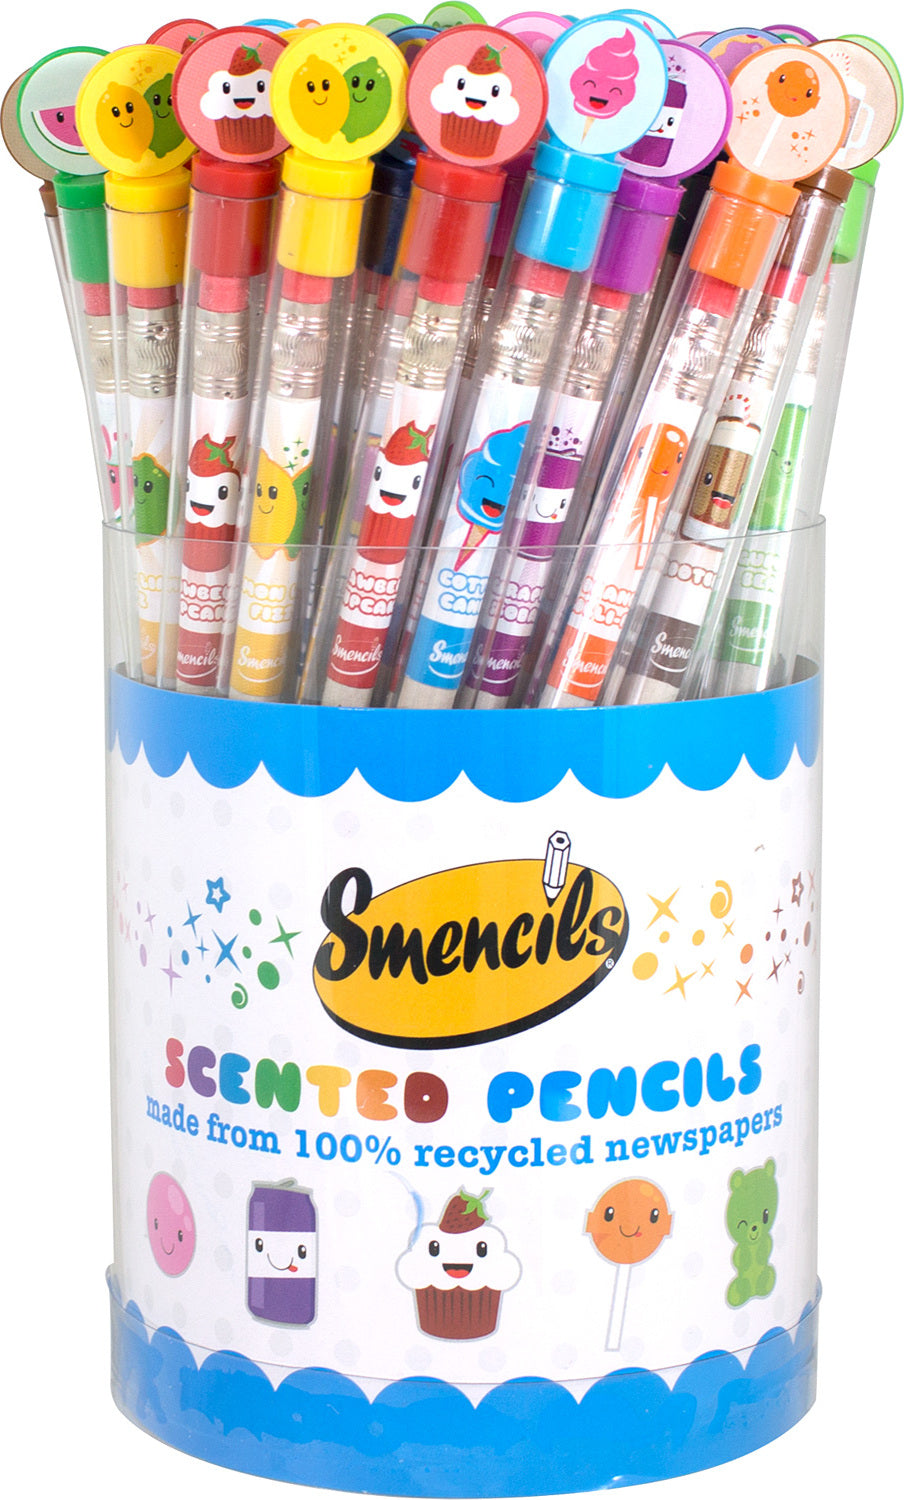 60 Pieces Scented Pencils for Kids Smencils Scented Pencils with